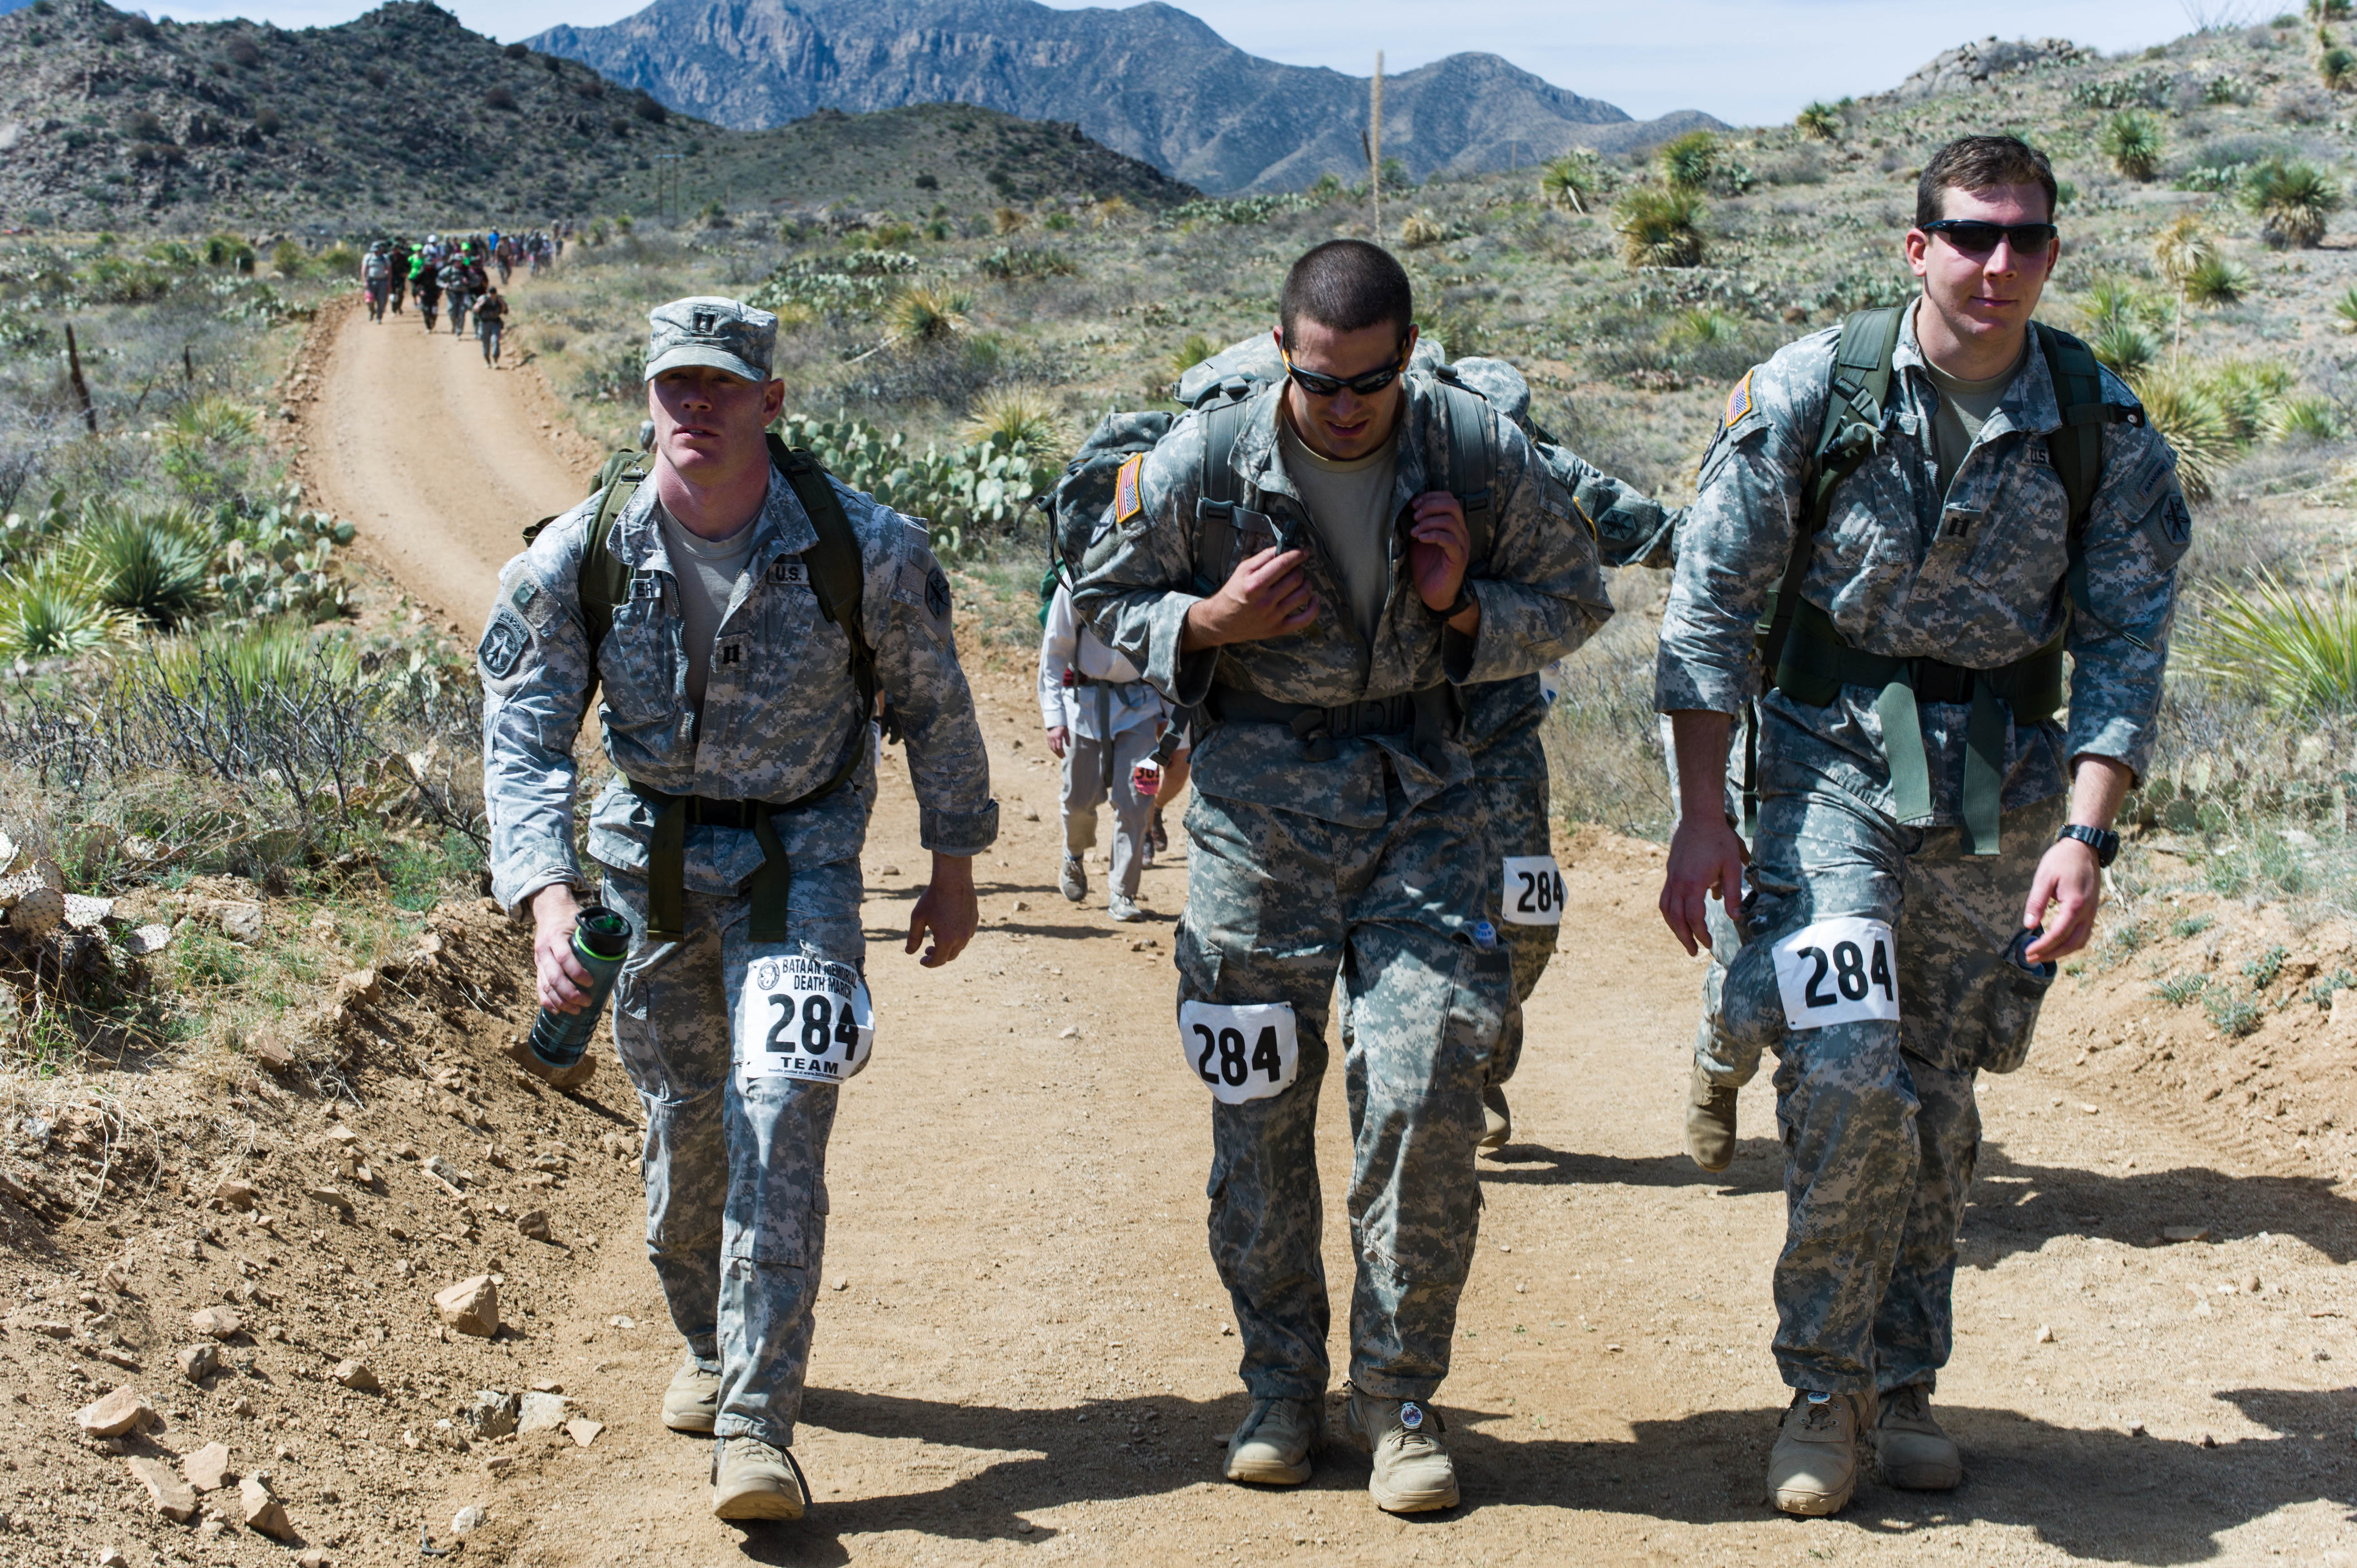 20120327-A-RE761-007: Capt. Aaron K. Smith, a member of the 81st Civil Affairs Battalion, 85th Civil Affairs Brigade ‘Tribal Endurance’ Team leads the way at mile 17 during the 23rd Annual Bataan Memorial Death March held March 25 at the U.S. Army White Sands Missile Range in New Mexico. The ‘Tribal Endurance’ team officially placed third overall in the military male heavy team division with each member carrying a rucksack weighing at least 35lbs. The ‘Tribal Endurance’ team is also officially the highest placing male heavy division team based out of Fort Hood. (Photo by Staff Sgt. Michael J. Dator, 85th Civil Affairs Brigade Public Affairs)